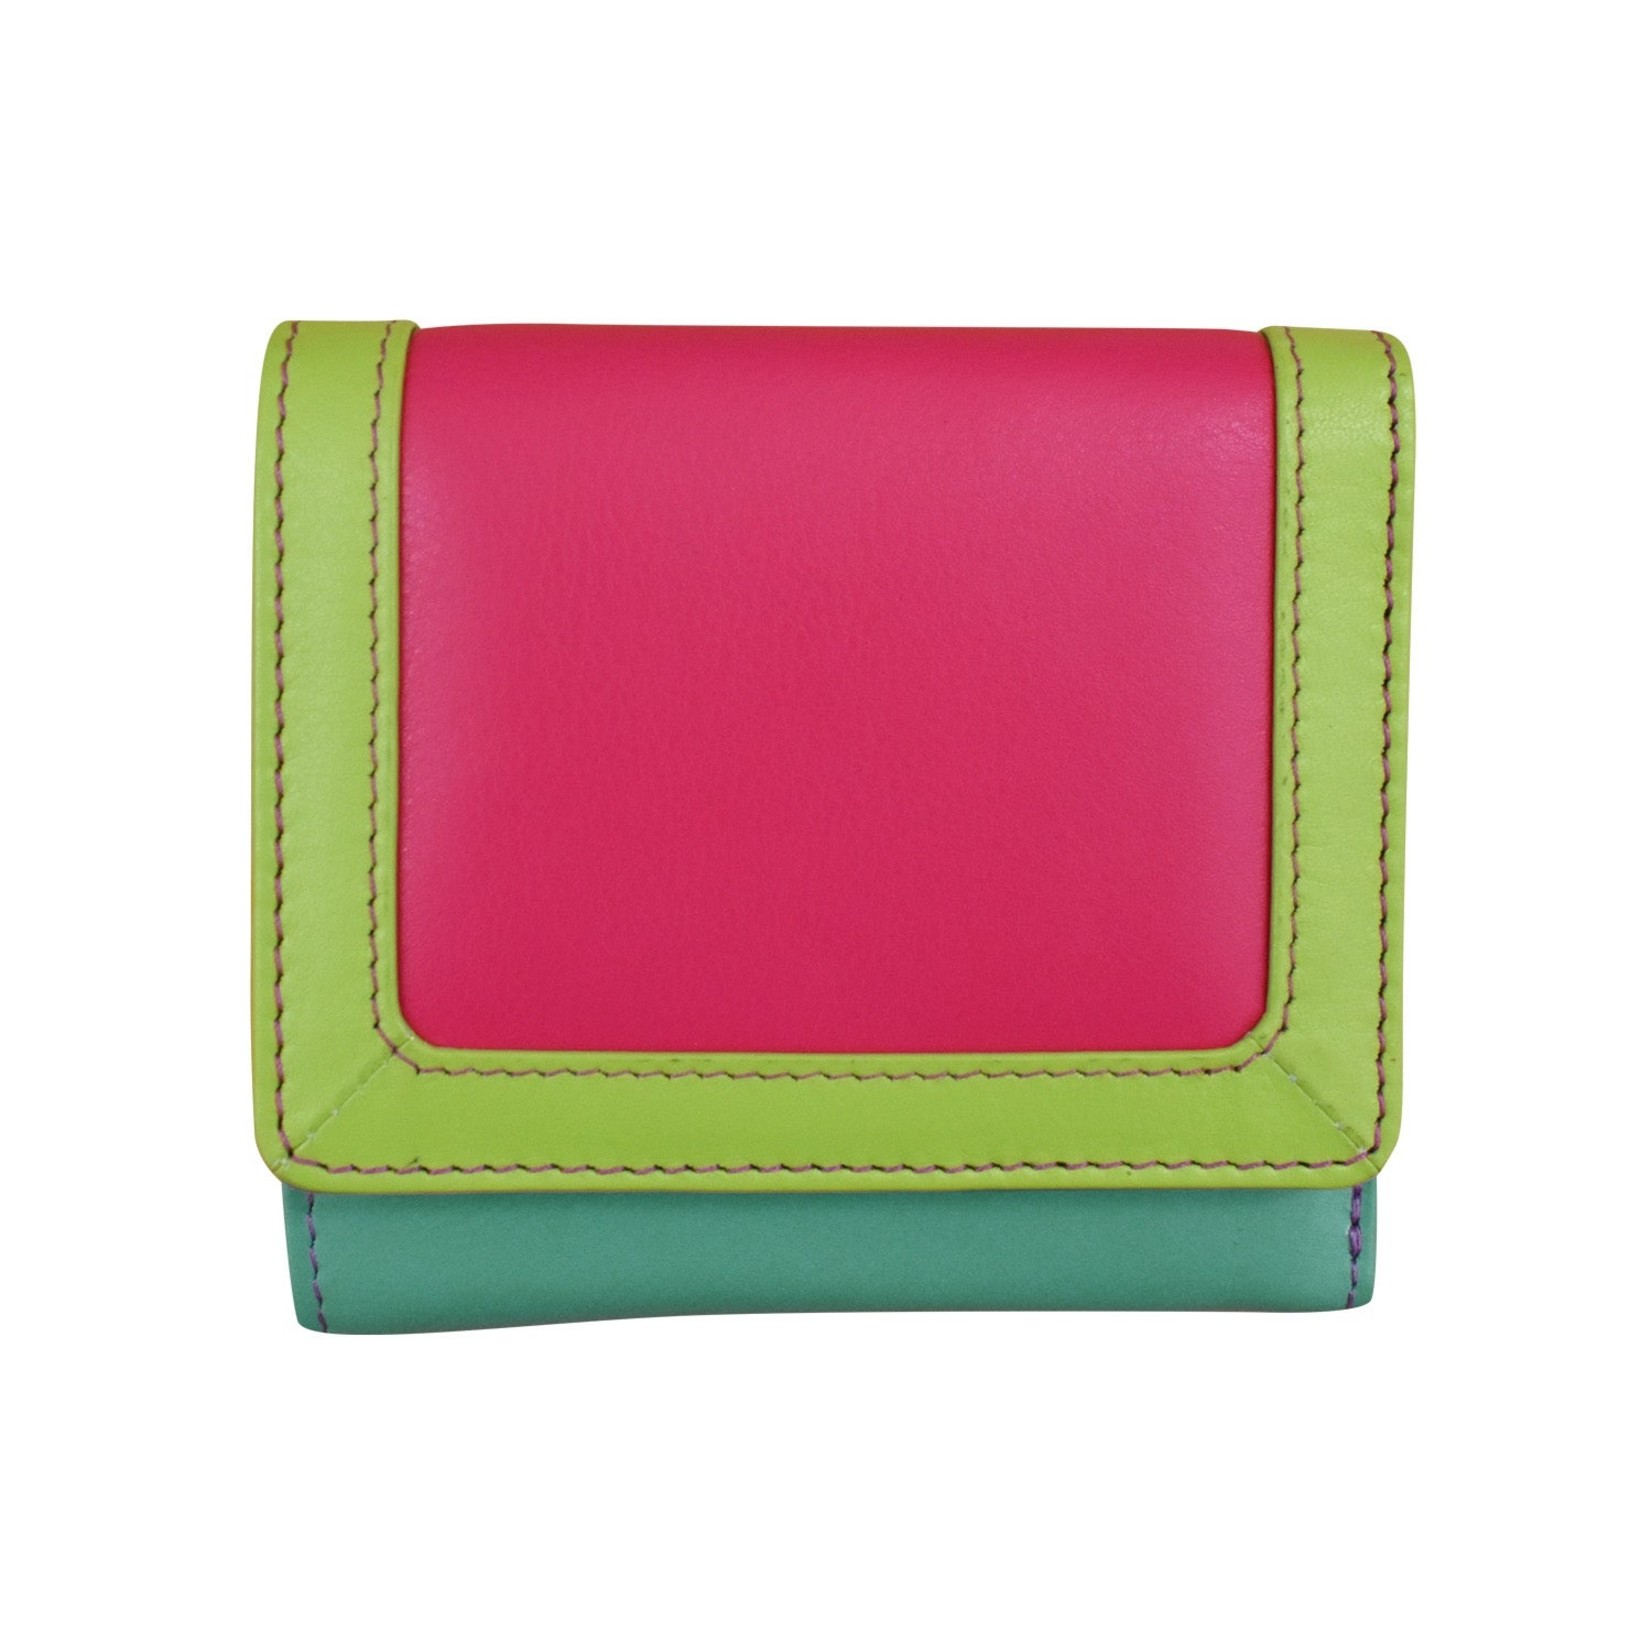 Leather Handbags and Accessories 7824 Palm Beach - RFID Tri-fold Color Block Mini Wallet